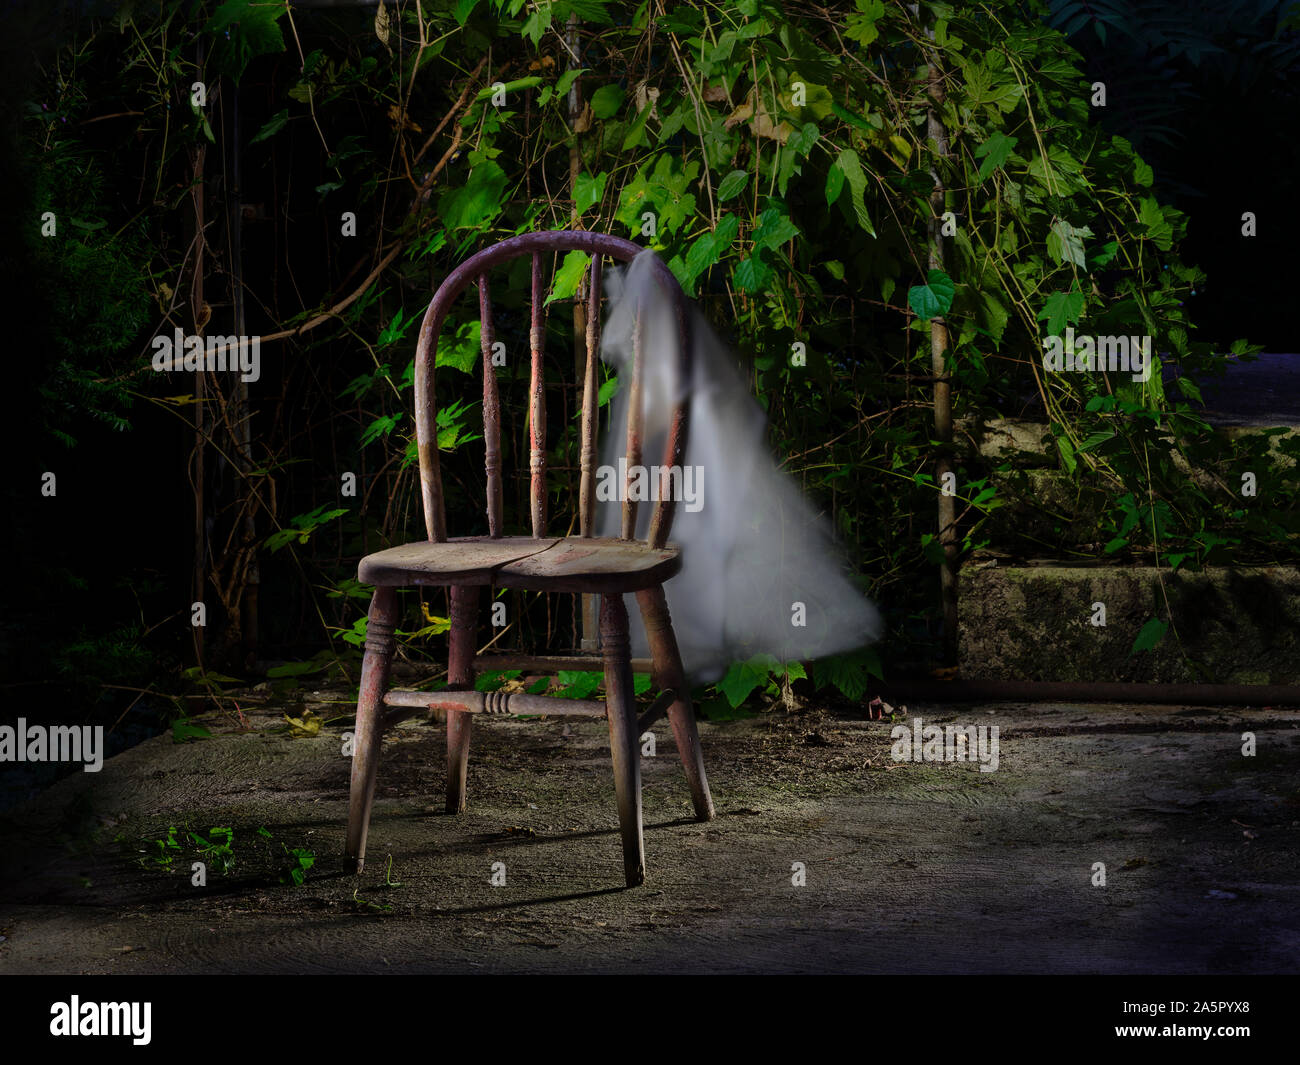 Old chair with cloth blowing in the breeze Stock Photo